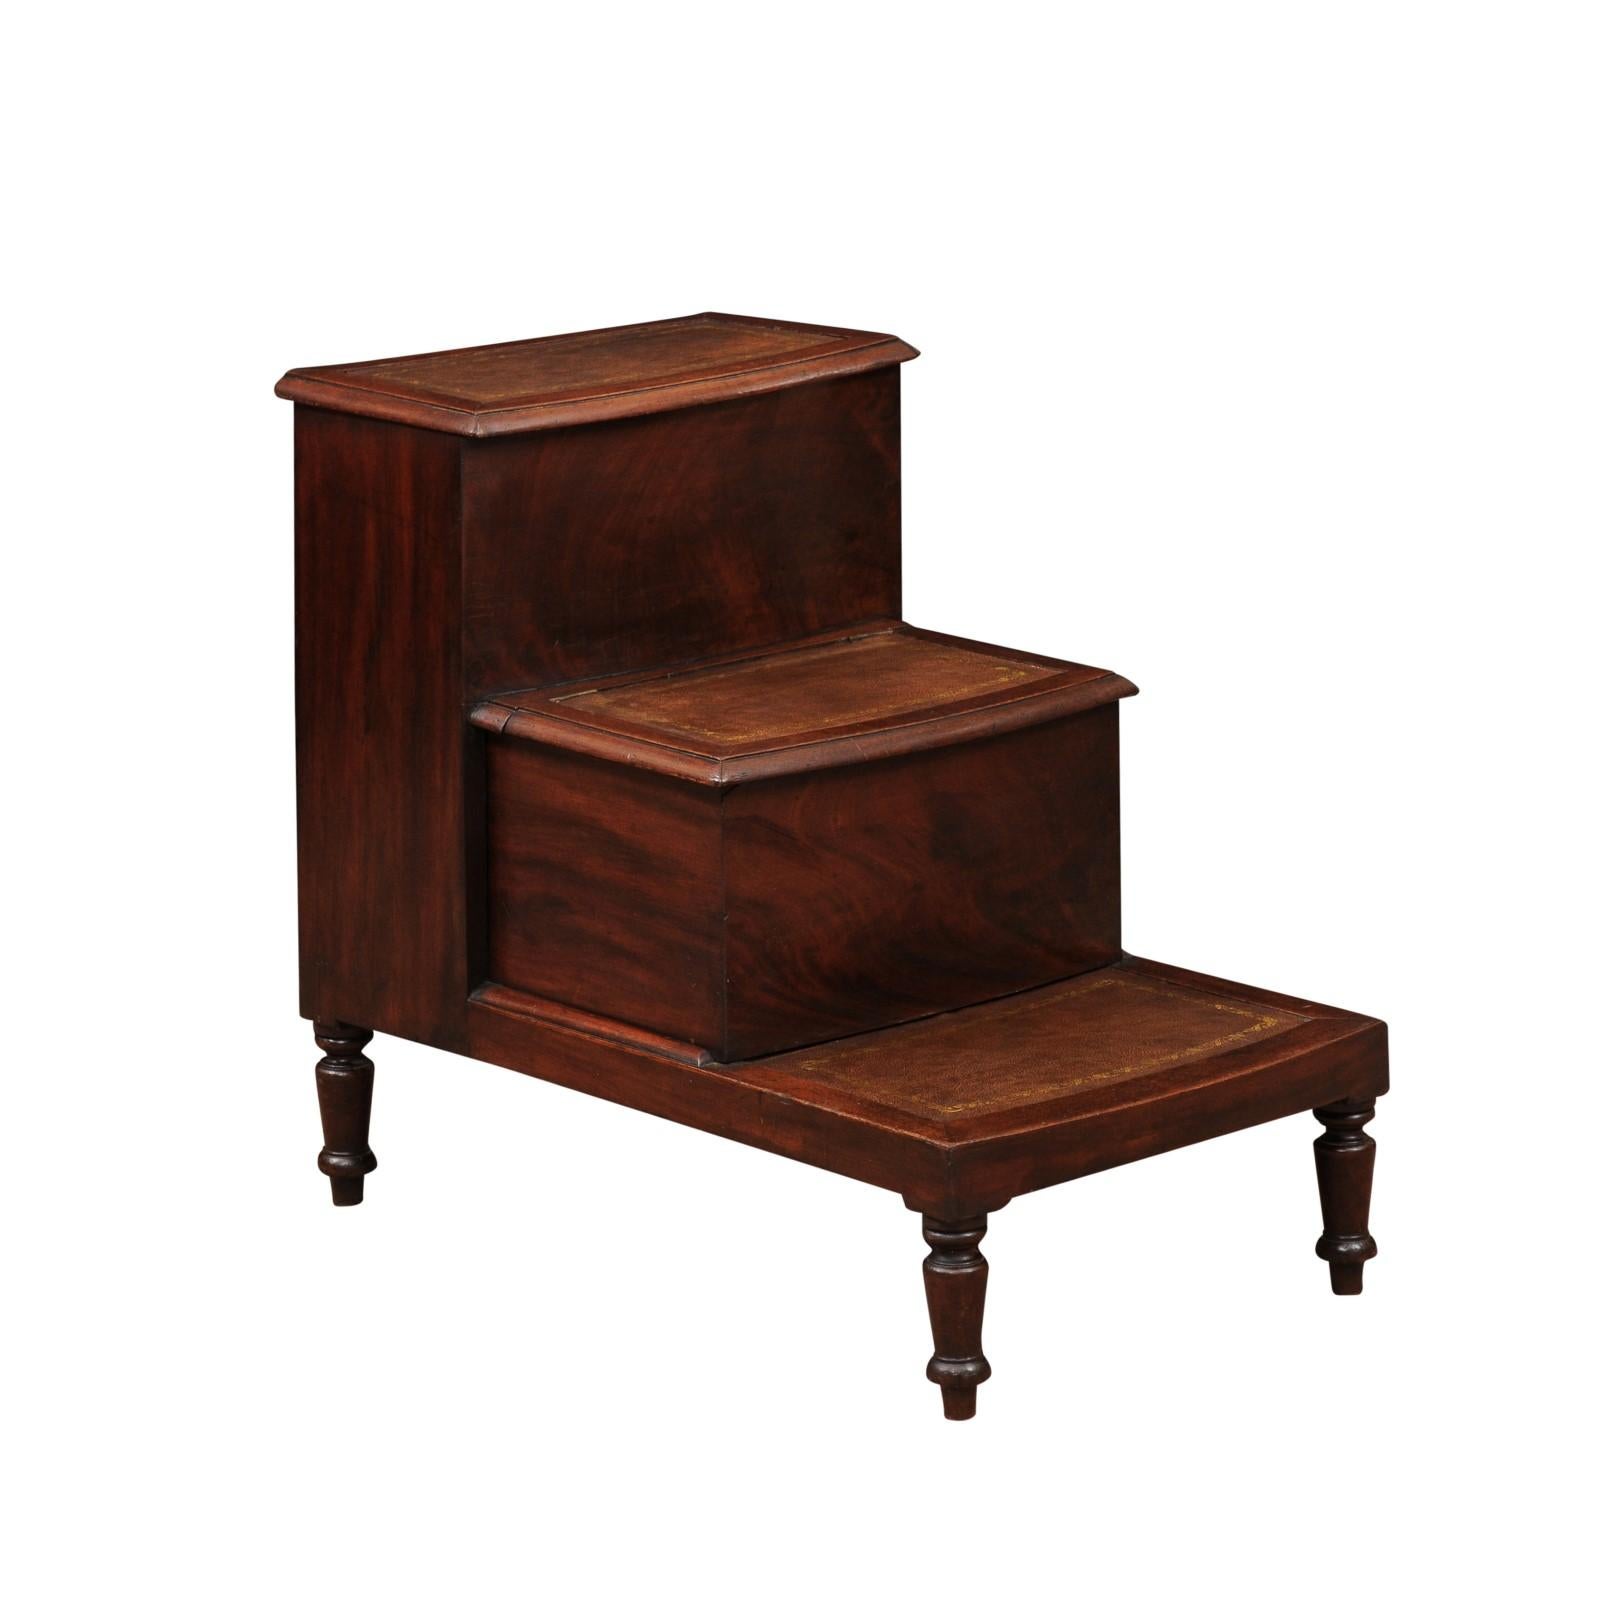  19th Century English Regency Library Steps in Mahogany with Embossed Leather For Sale 3